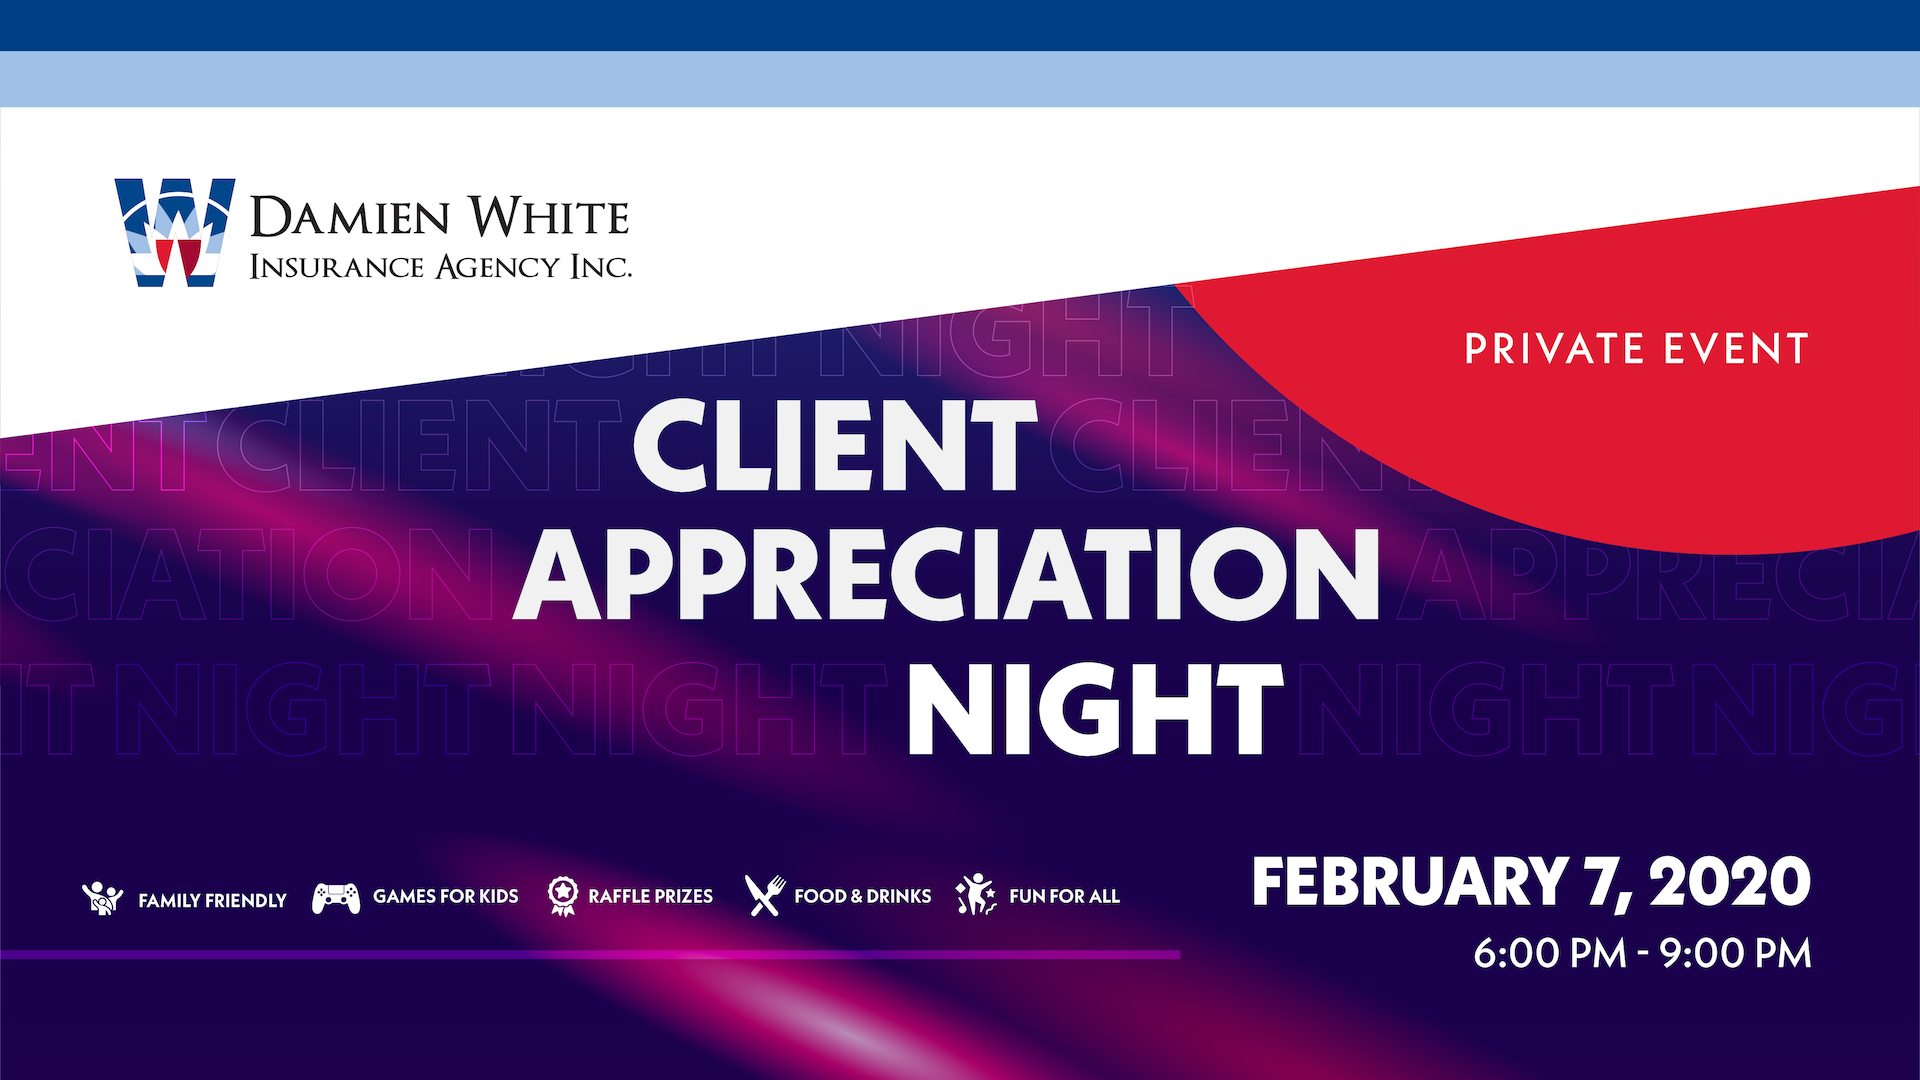 damien white insurance agency client appreciation night poster